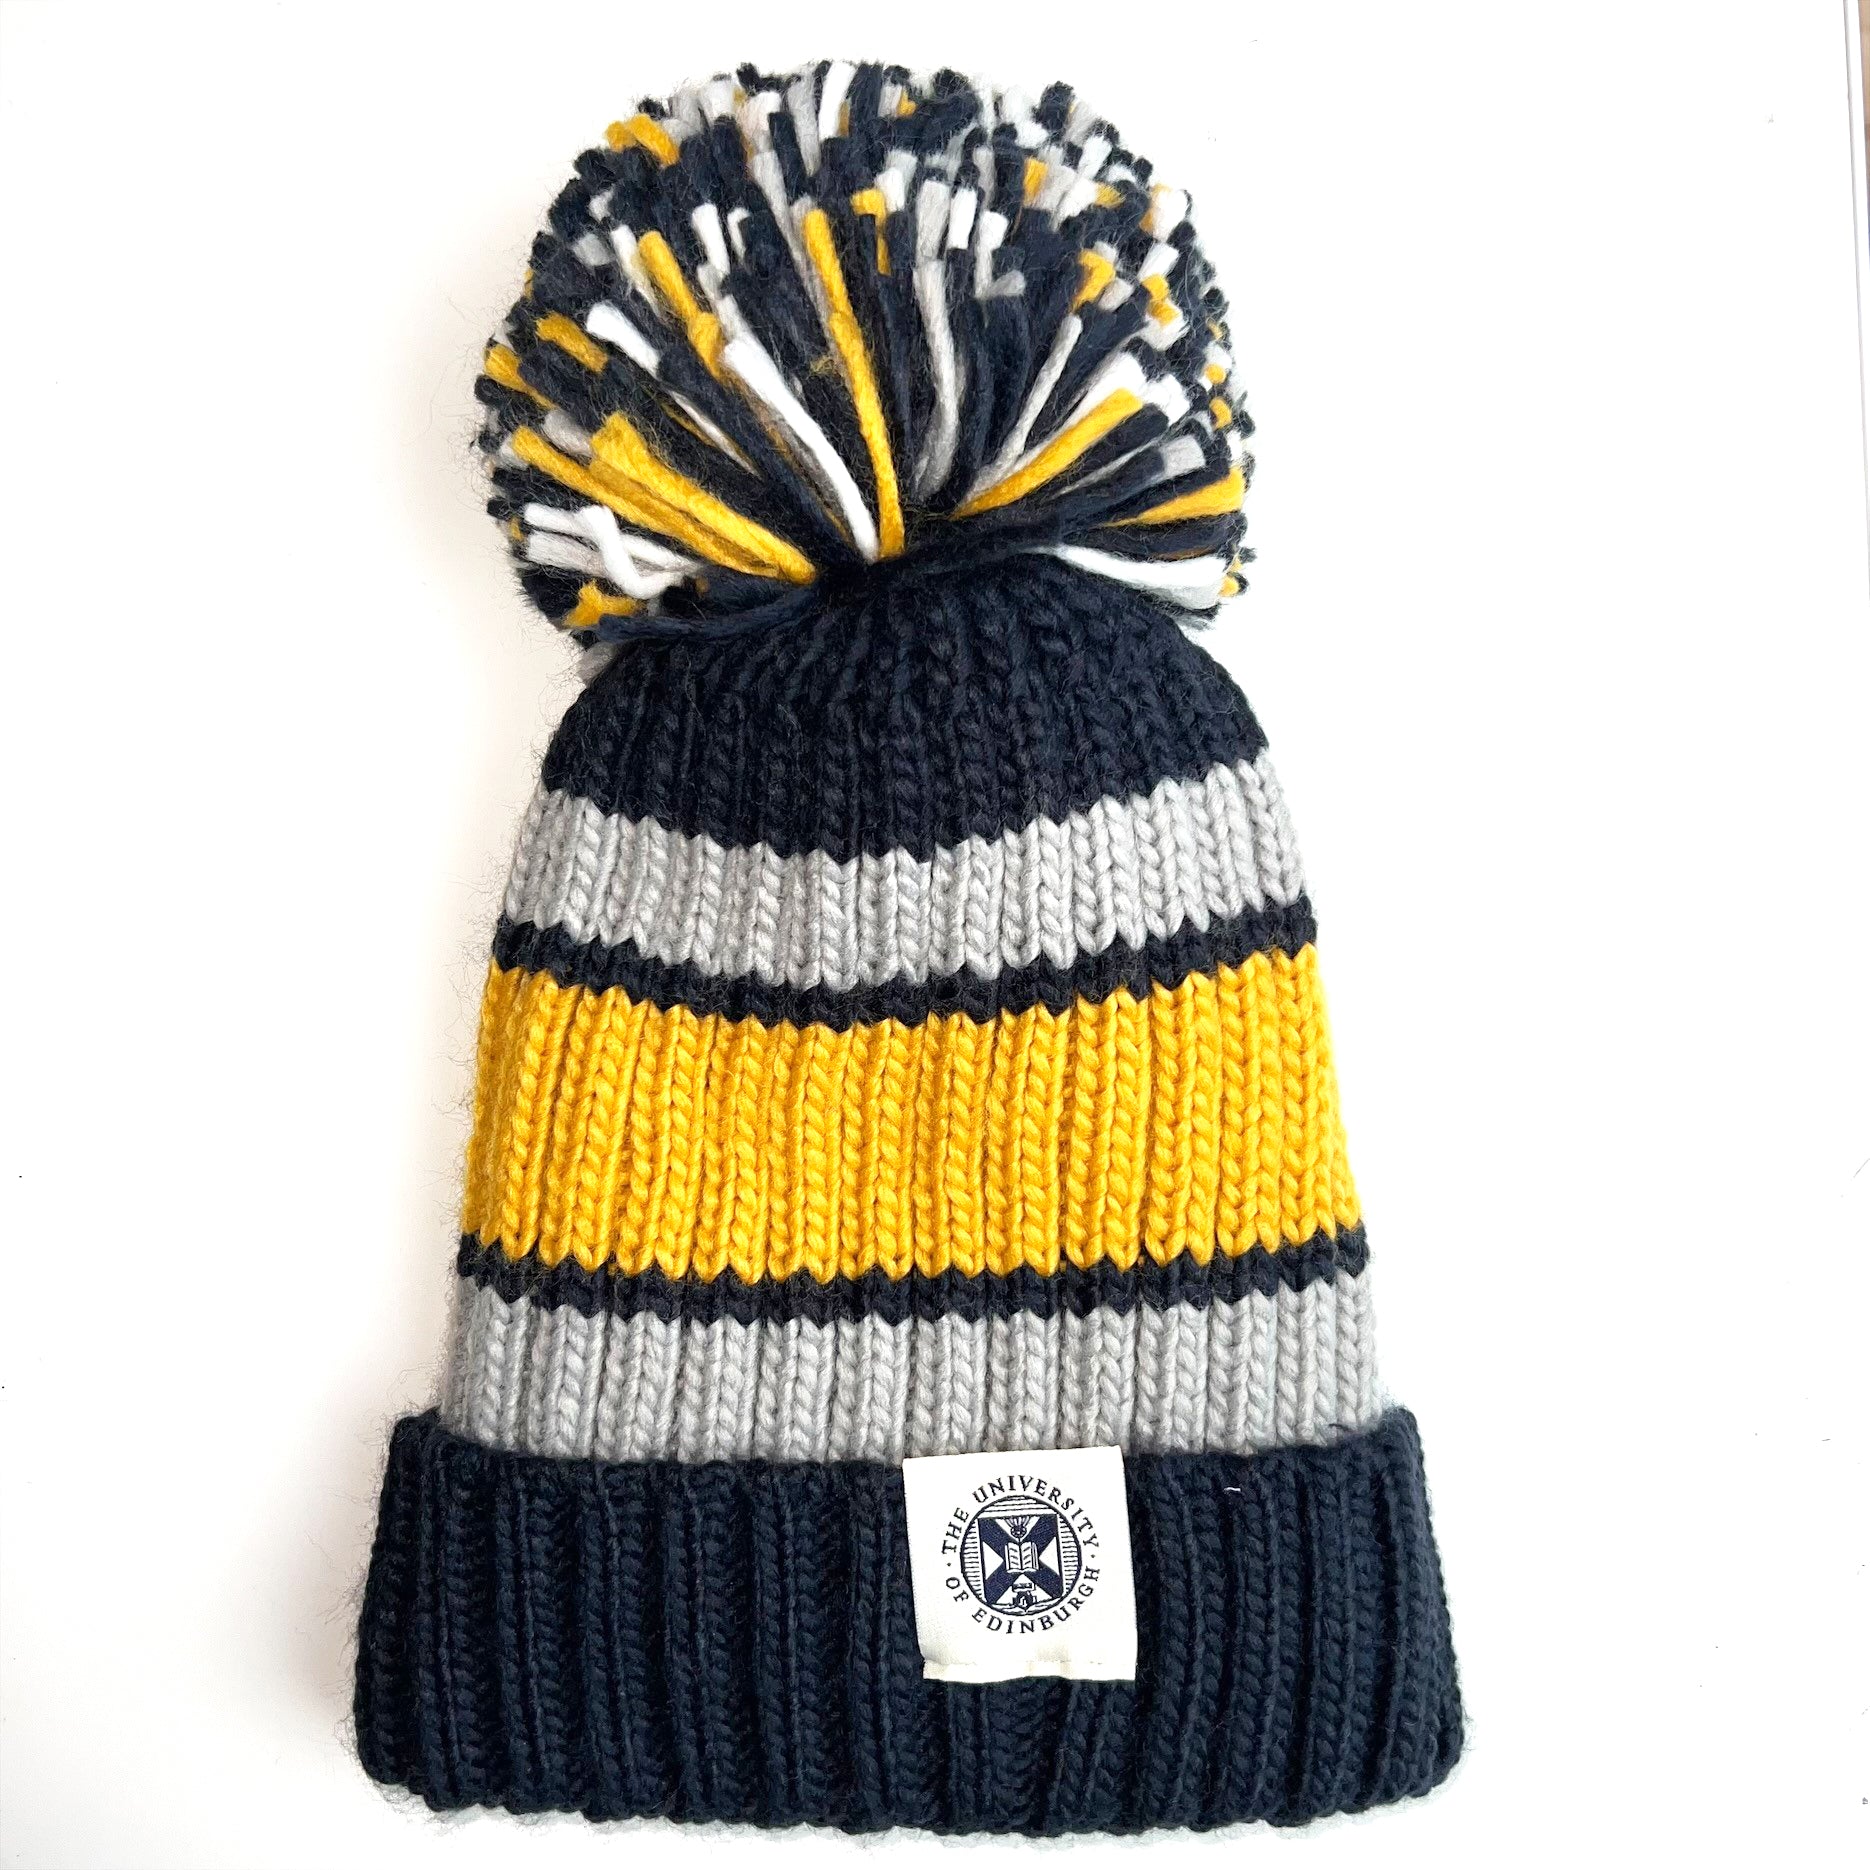 Ribbed knit pom pom hat with grey and yellow striping and pom pom detailing. 